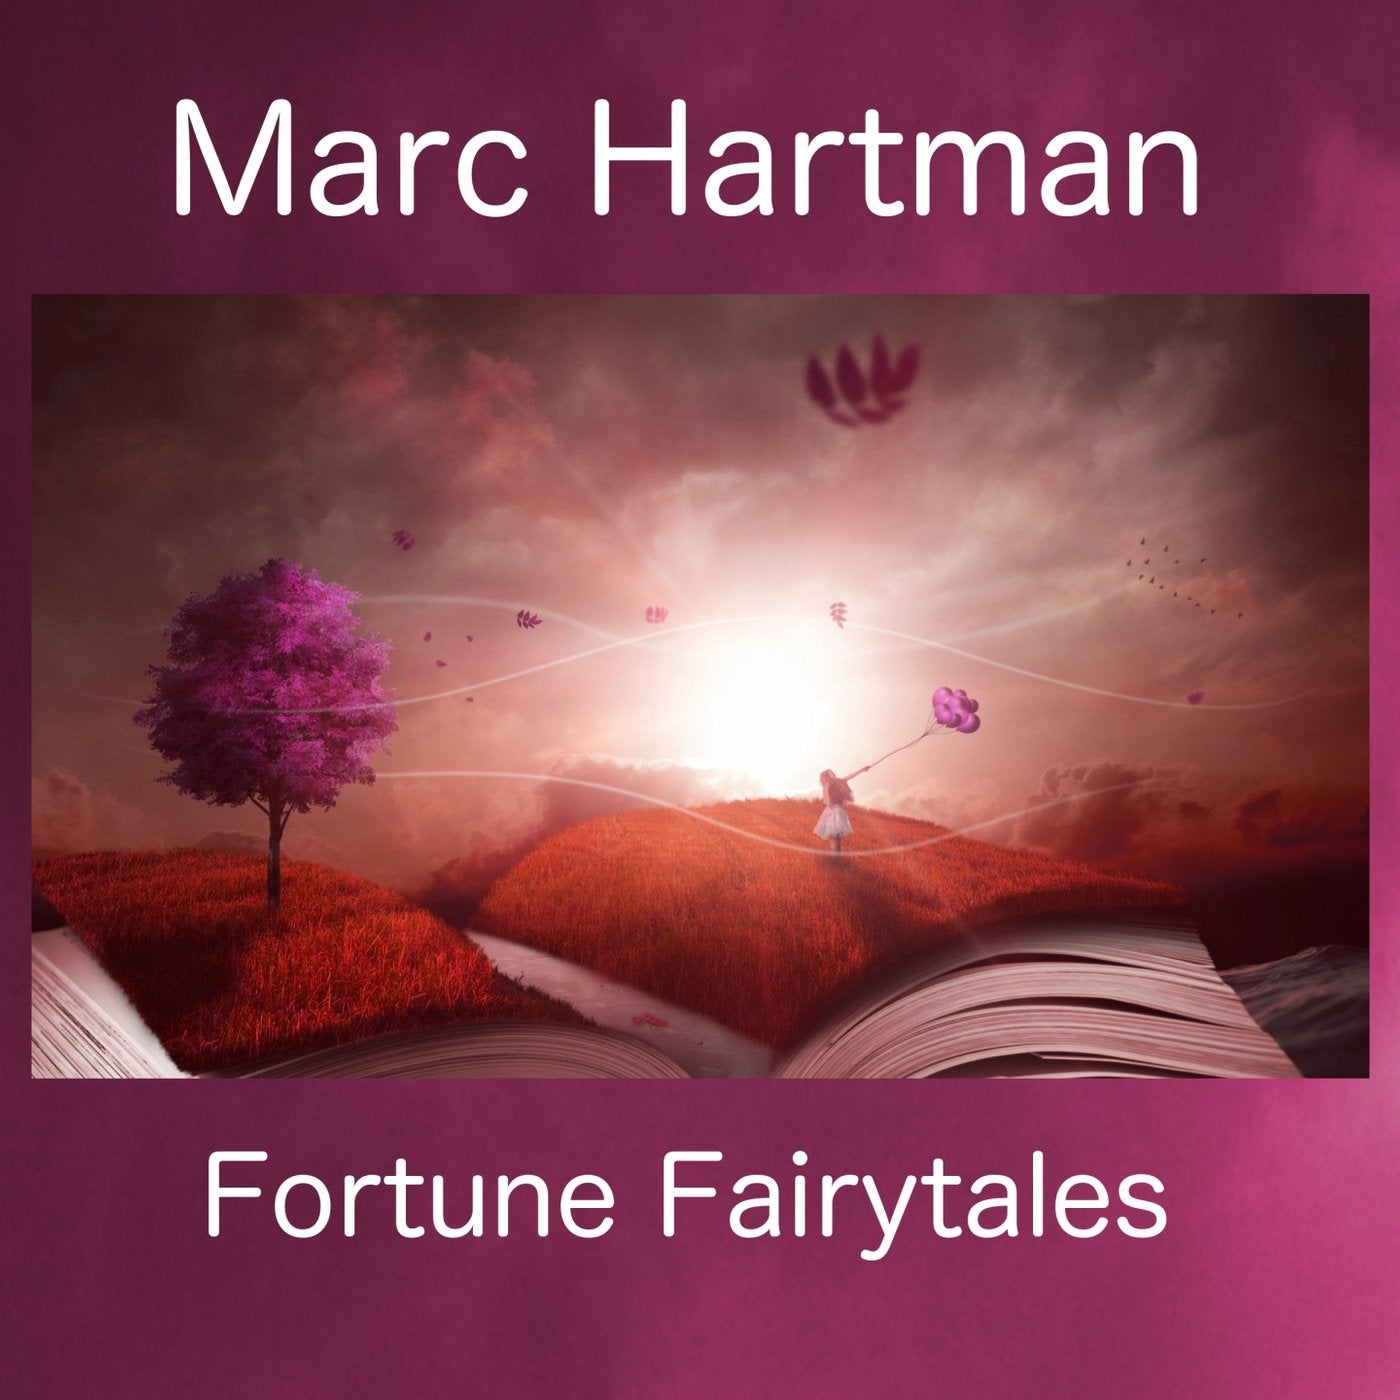 Fortune Fairytales